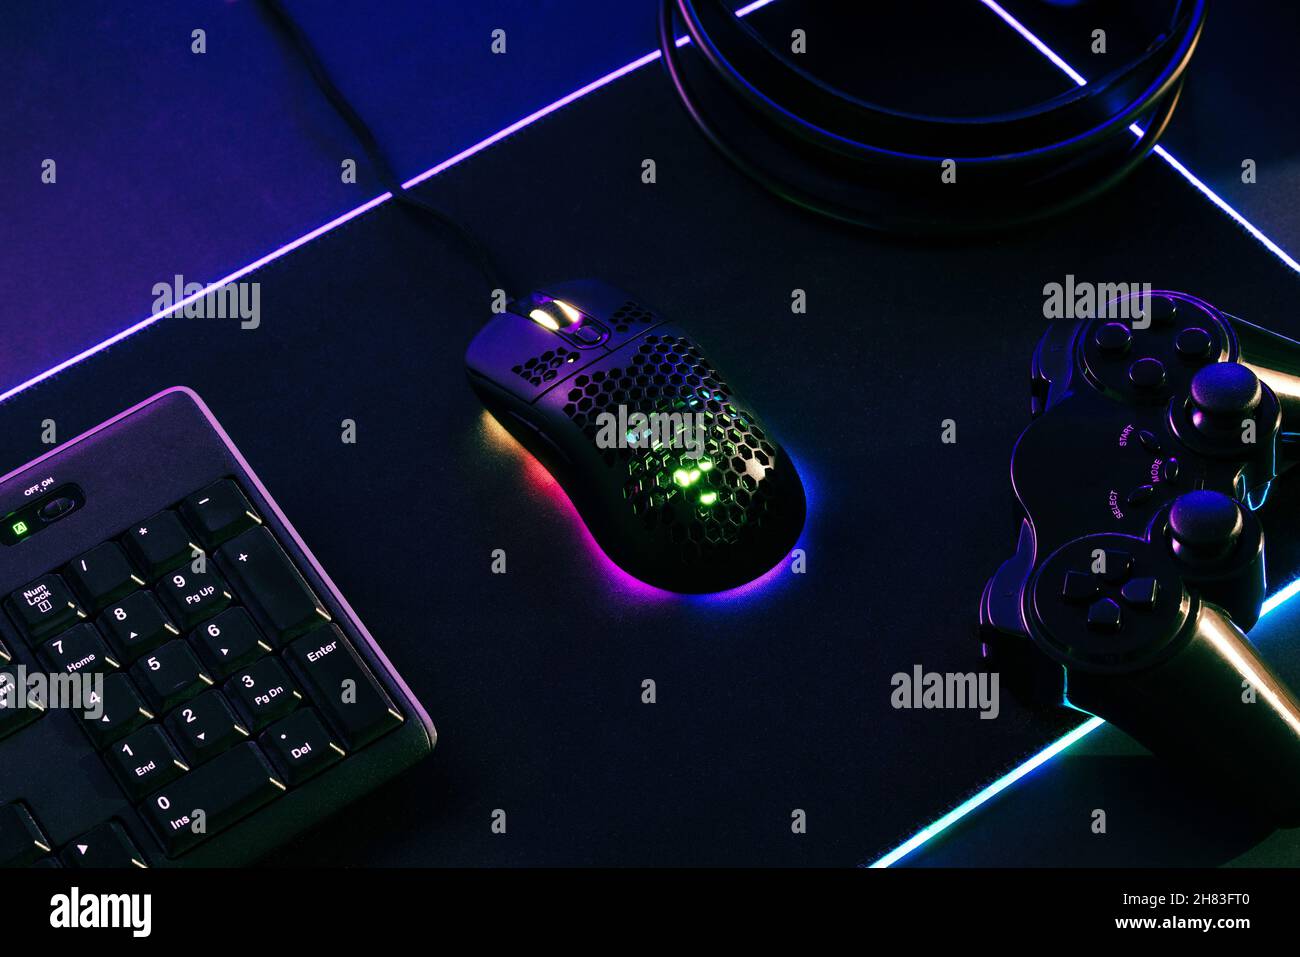 Gaming composition with mouse, keyboard, jopad and headset on gaming led mat Stock Photo